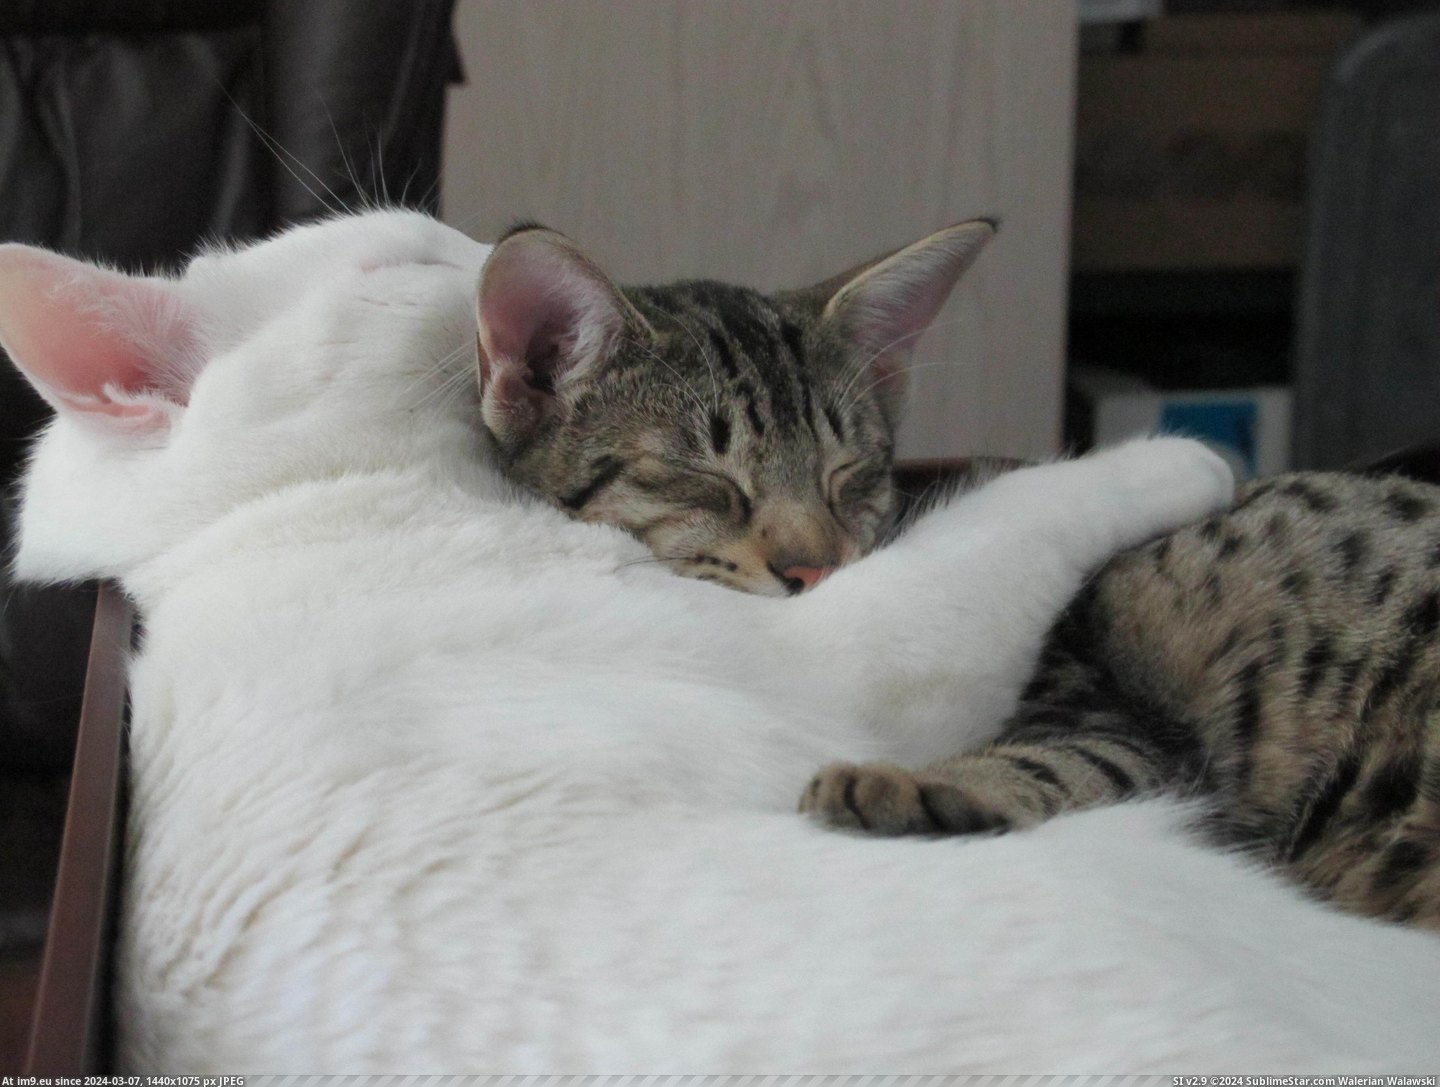 #Cats  #Inseparable [Cats] They're inseparable. 5 Pic. (Bild von album My r/CATS favs))